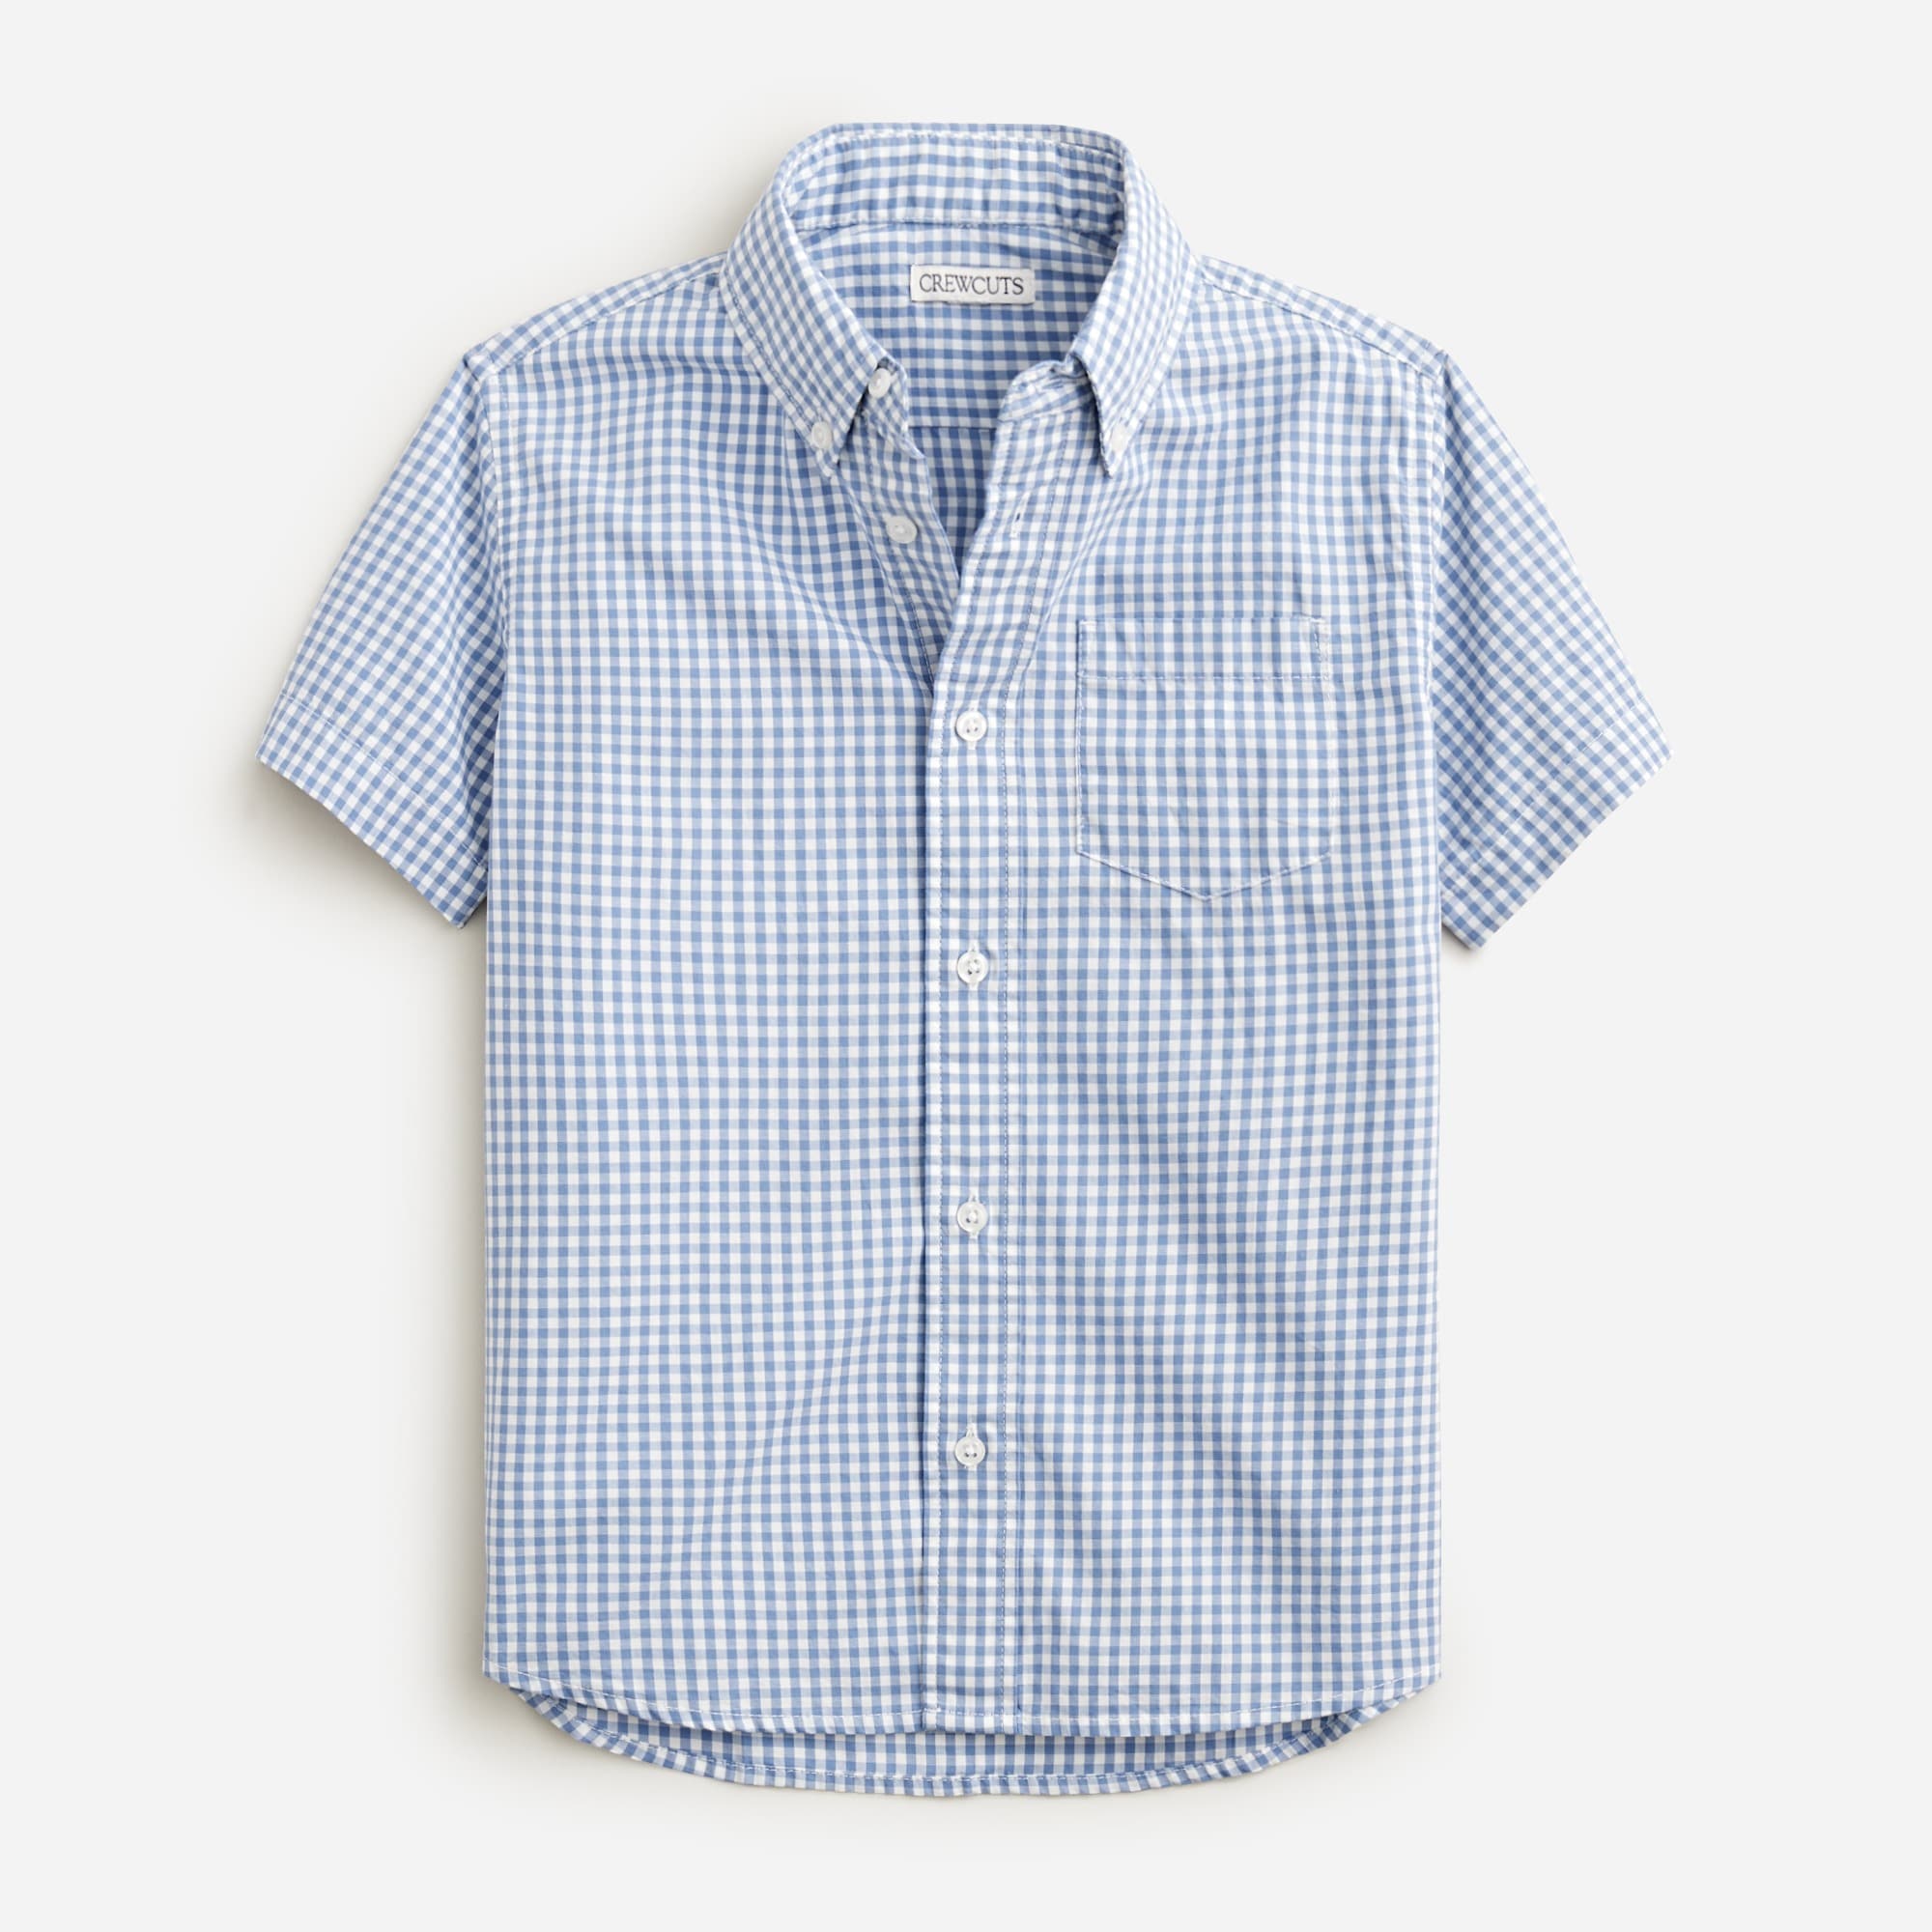  Kids' washed short-sleeve stretch poplin button-down in gingham